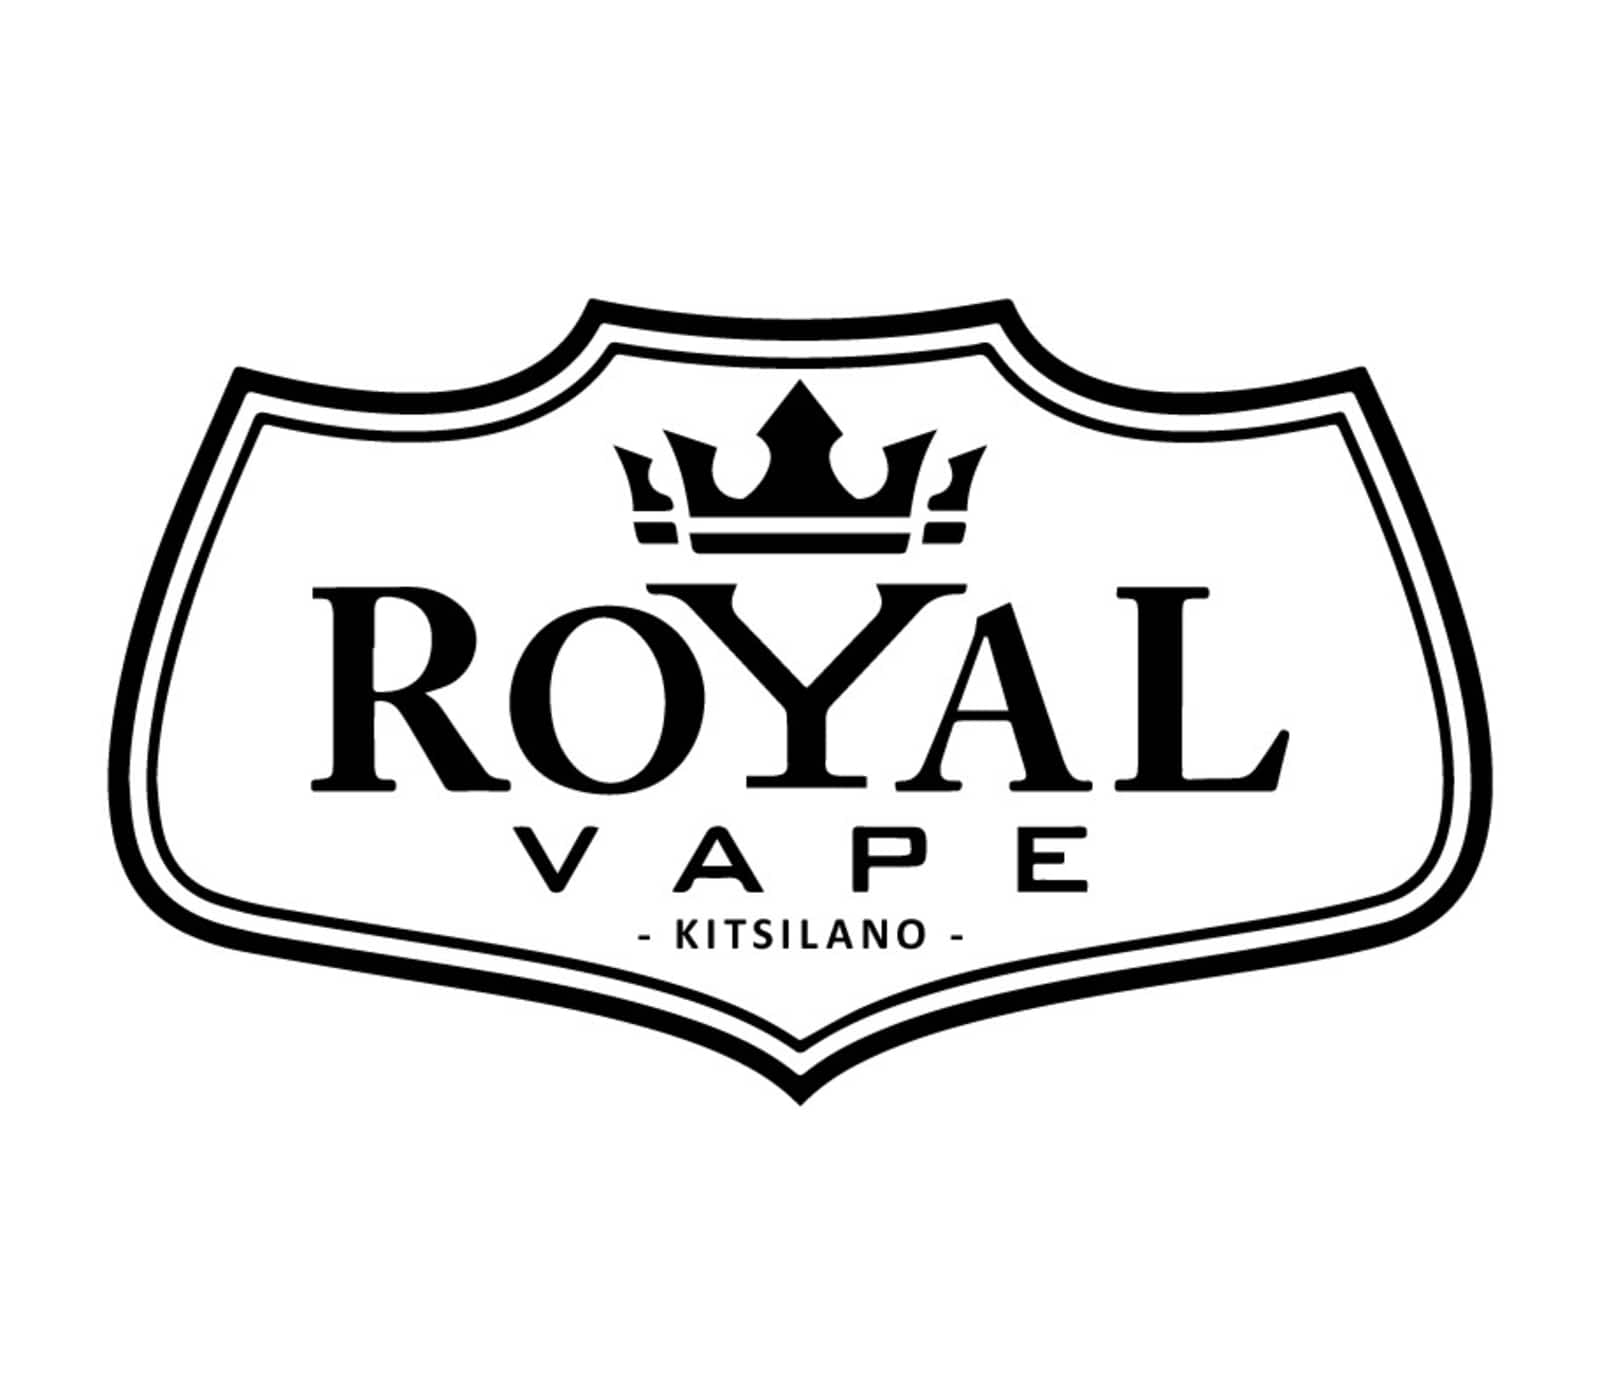 Vape royale Welcome to